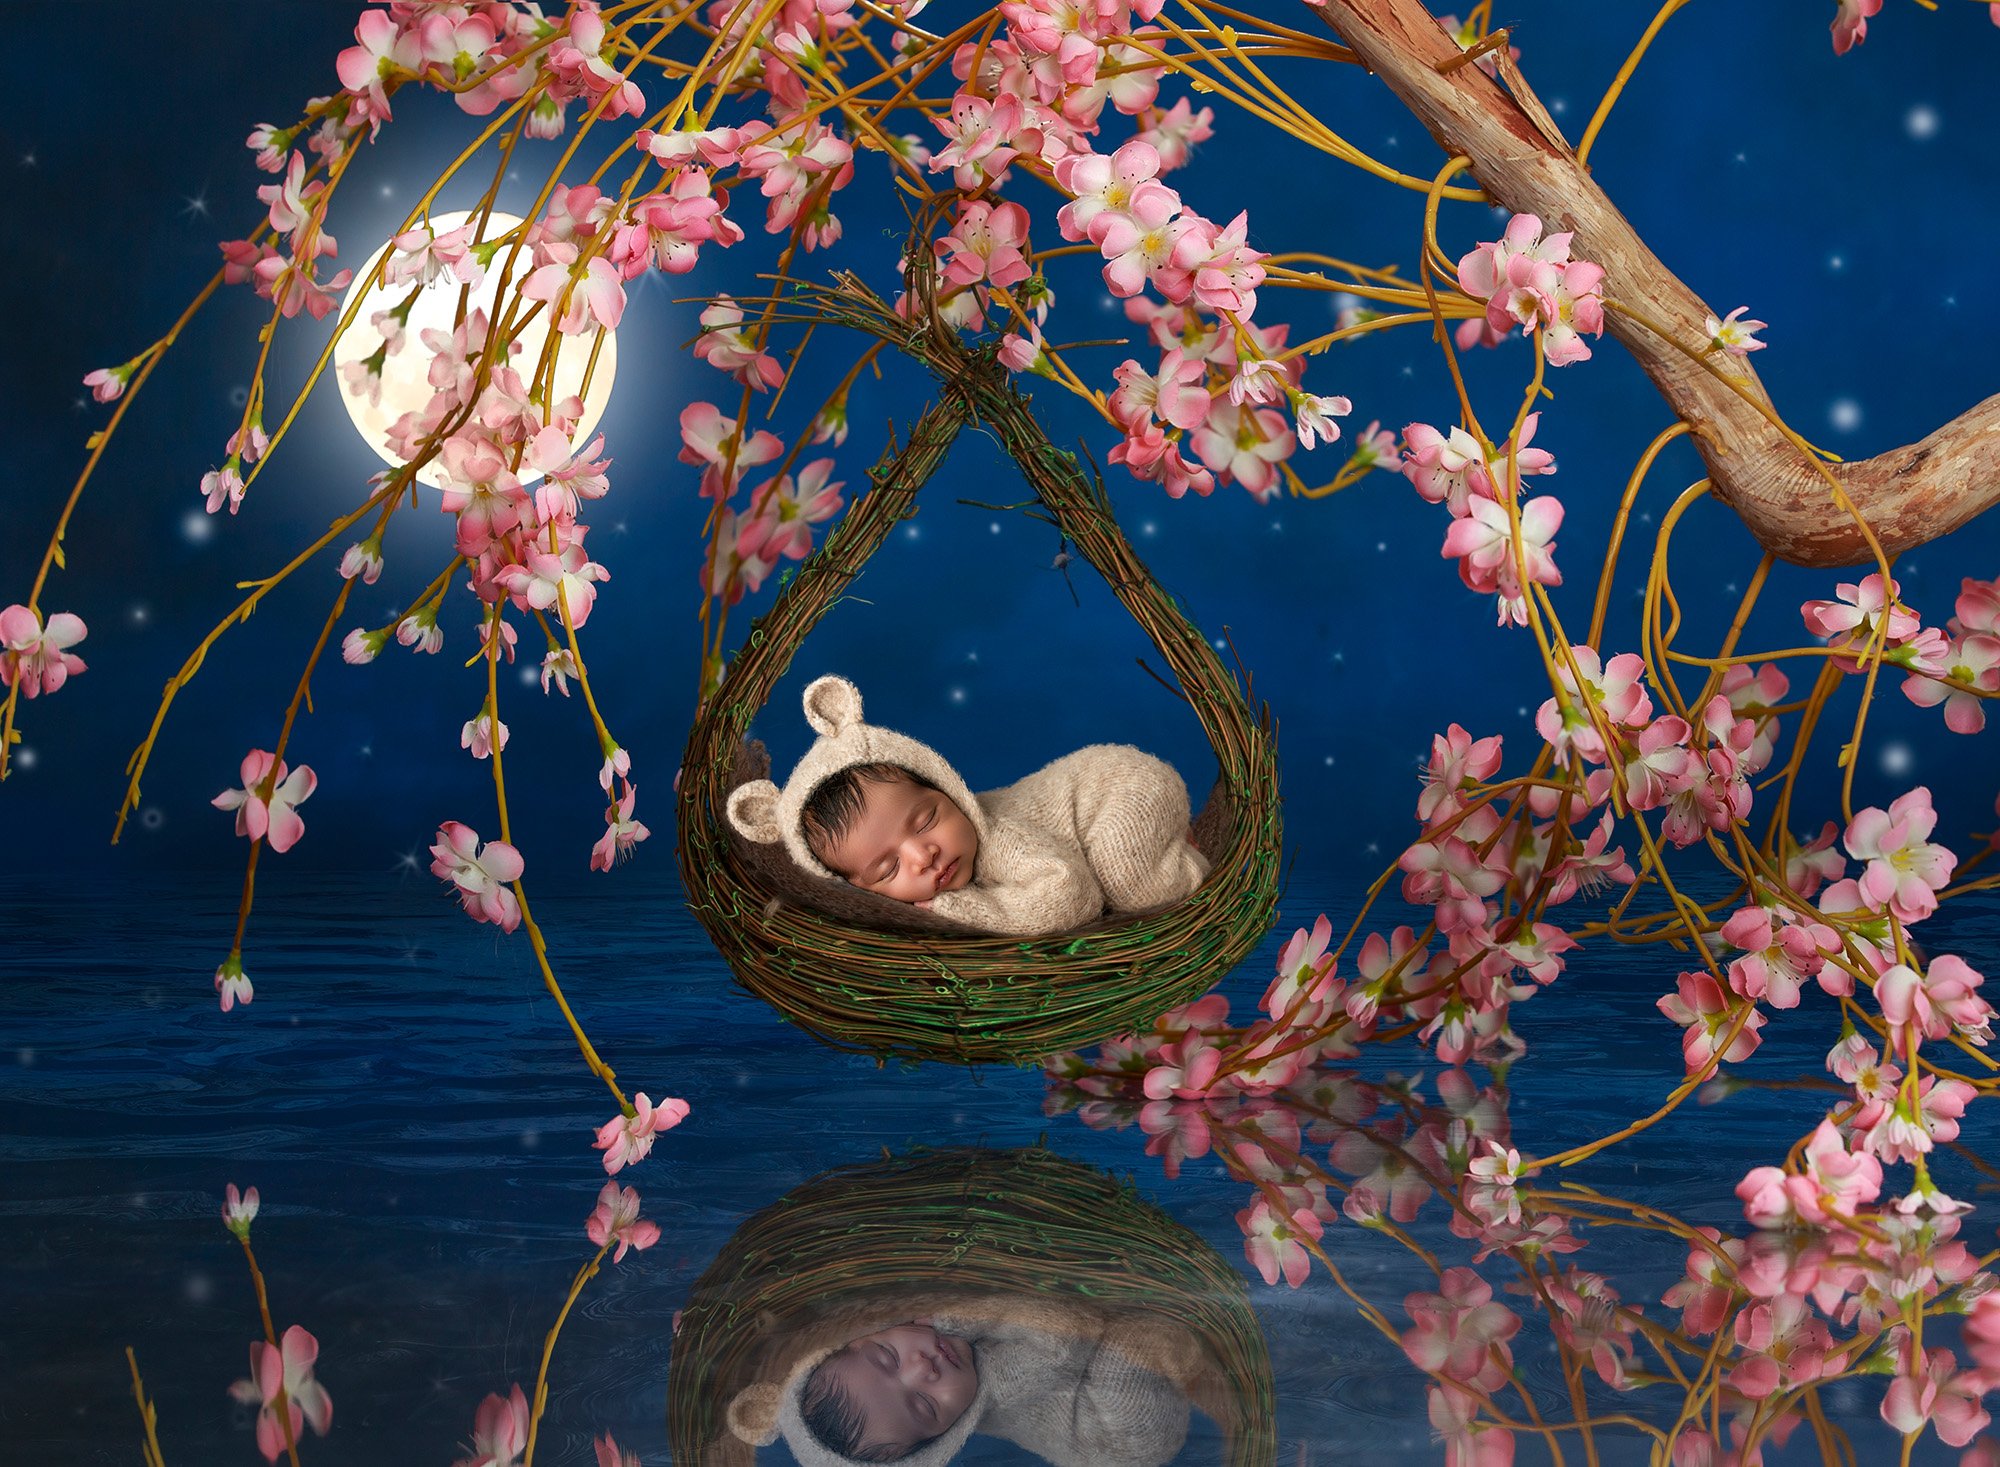 Professional Maternity Newborn Photographer newborn baby girl asleep in basket hanging from floral tree under the moonlight